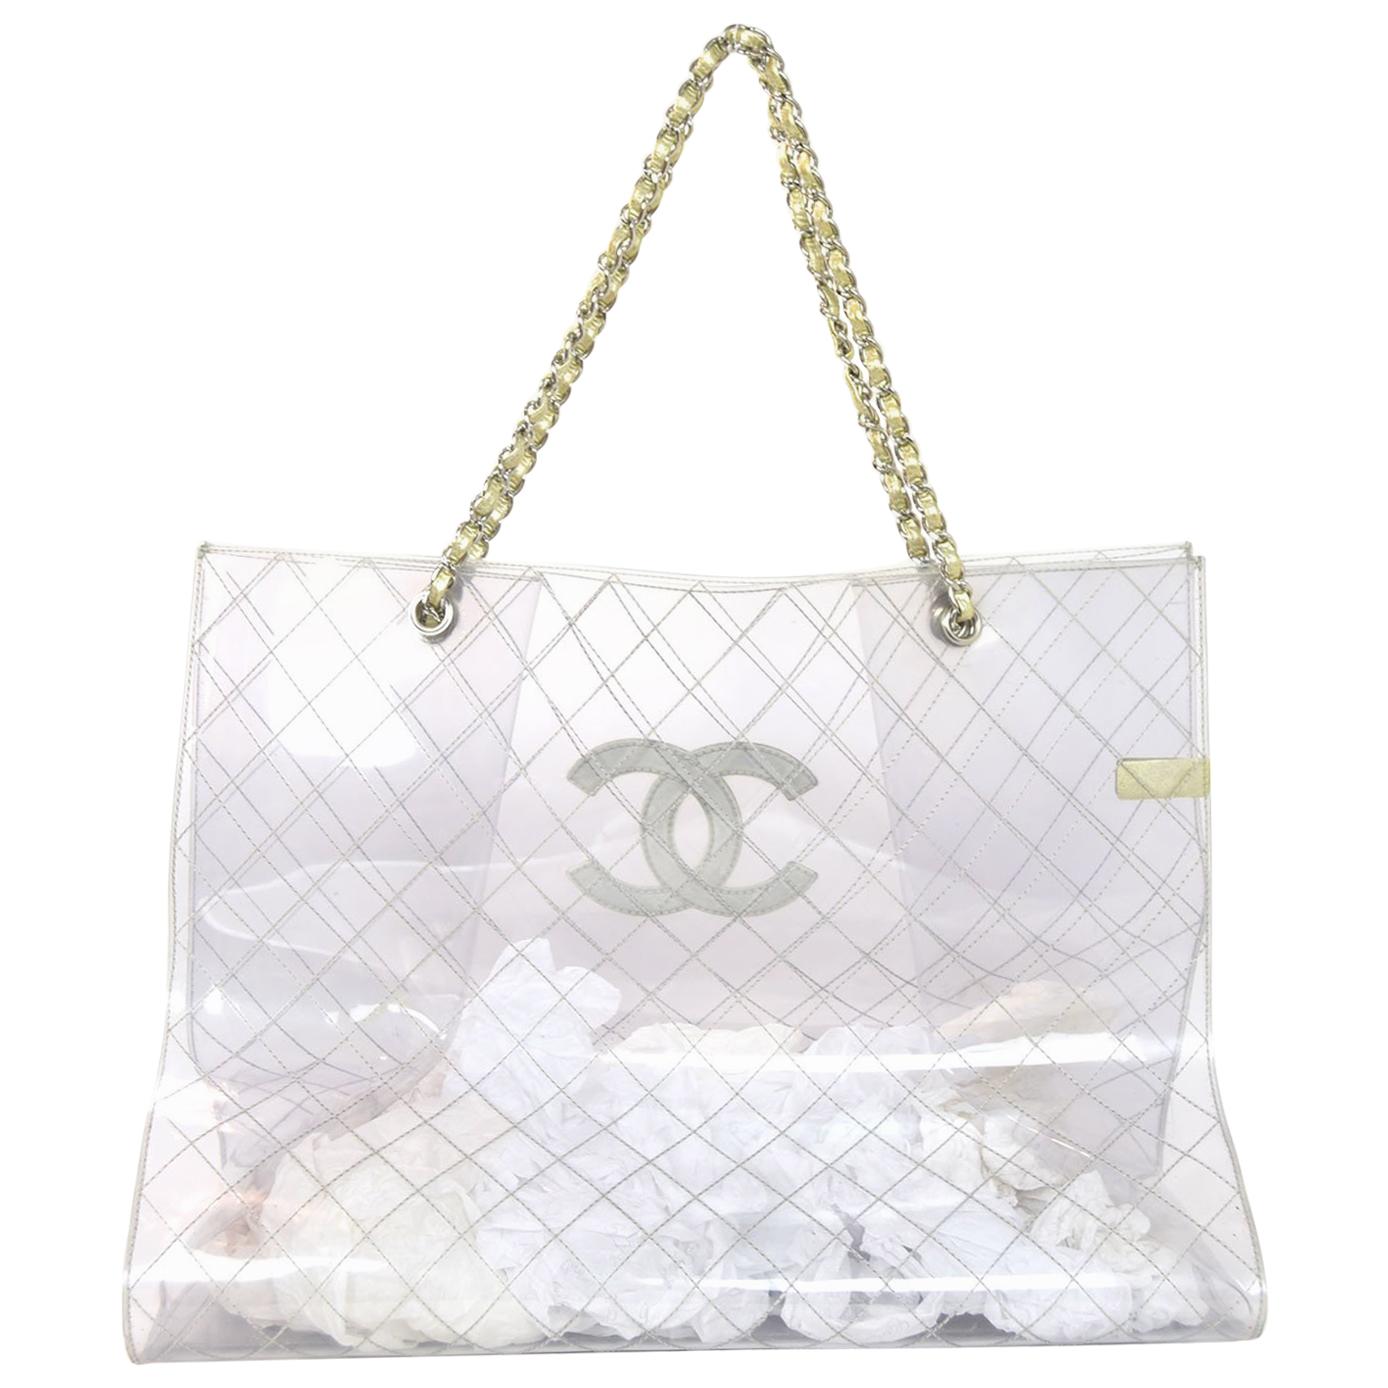 CHANEL Floral Bags & Handbags for Women, Authenticity Guaranteed